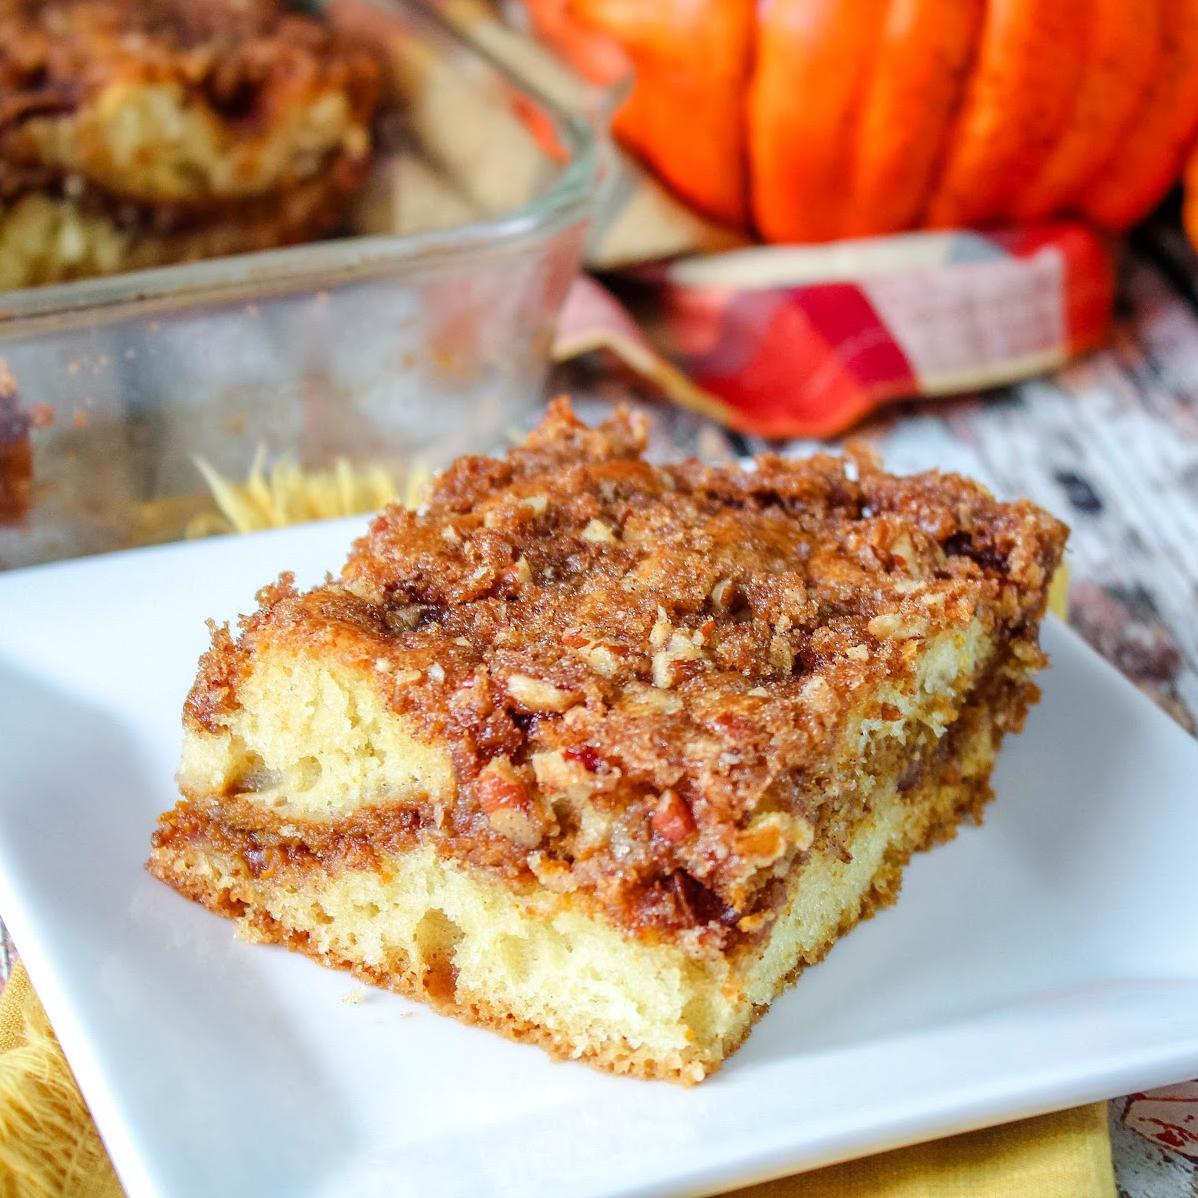  One slice is never enough when it comes to this incredible pumpkin sour cream coffee cake!